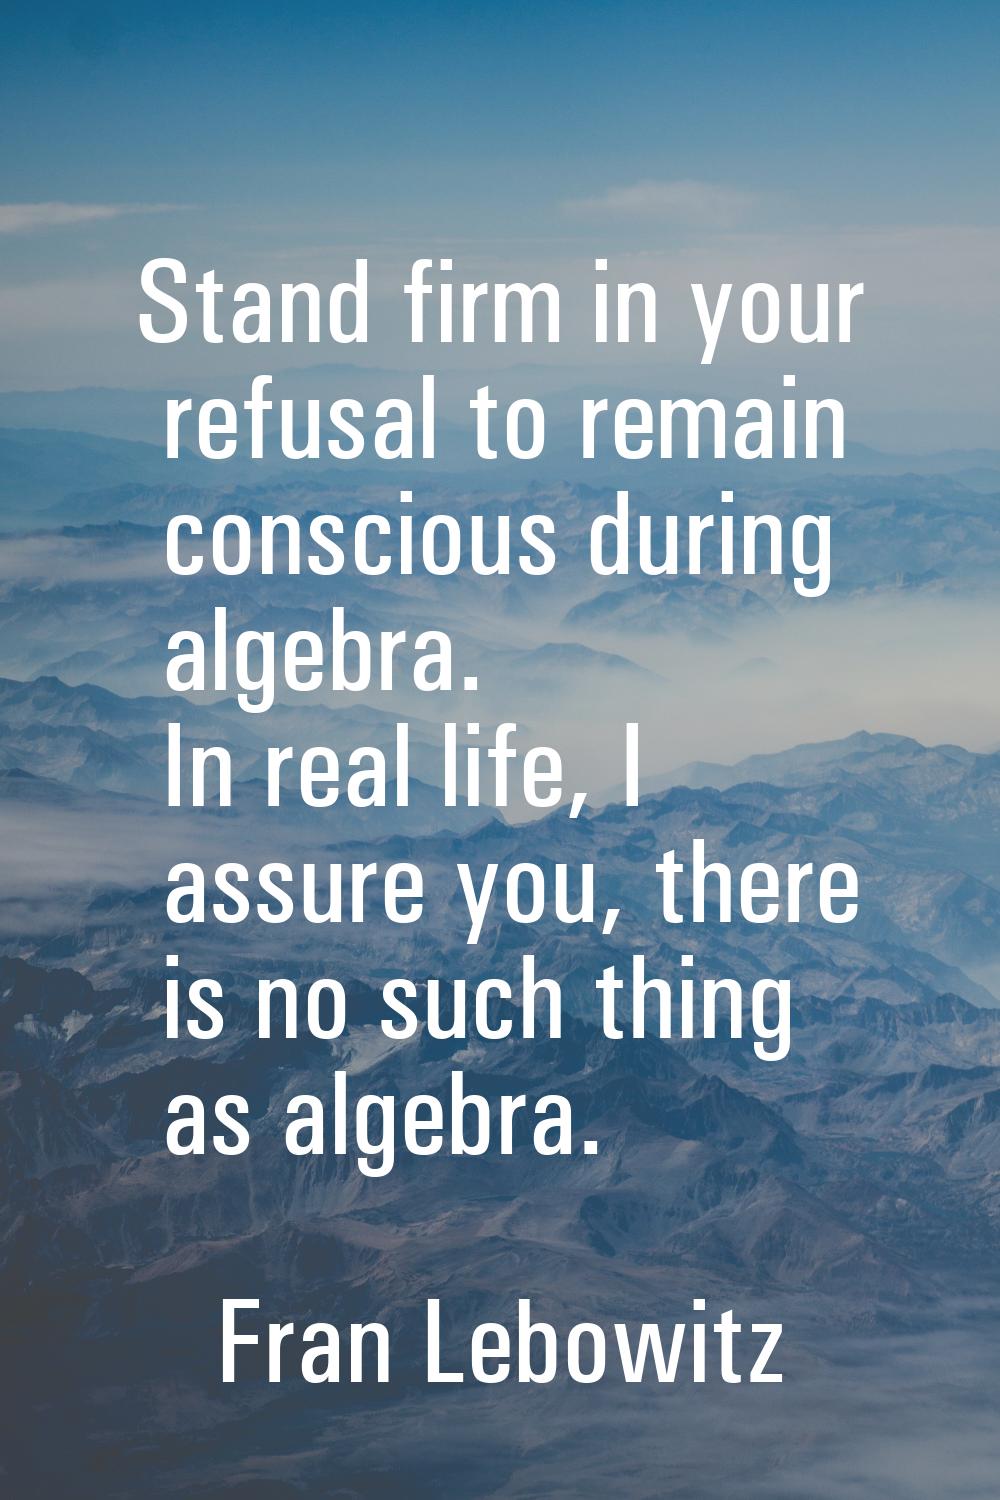 Stand firm in your refusal to remain conscious during algebra. In real life, I assure you, there is